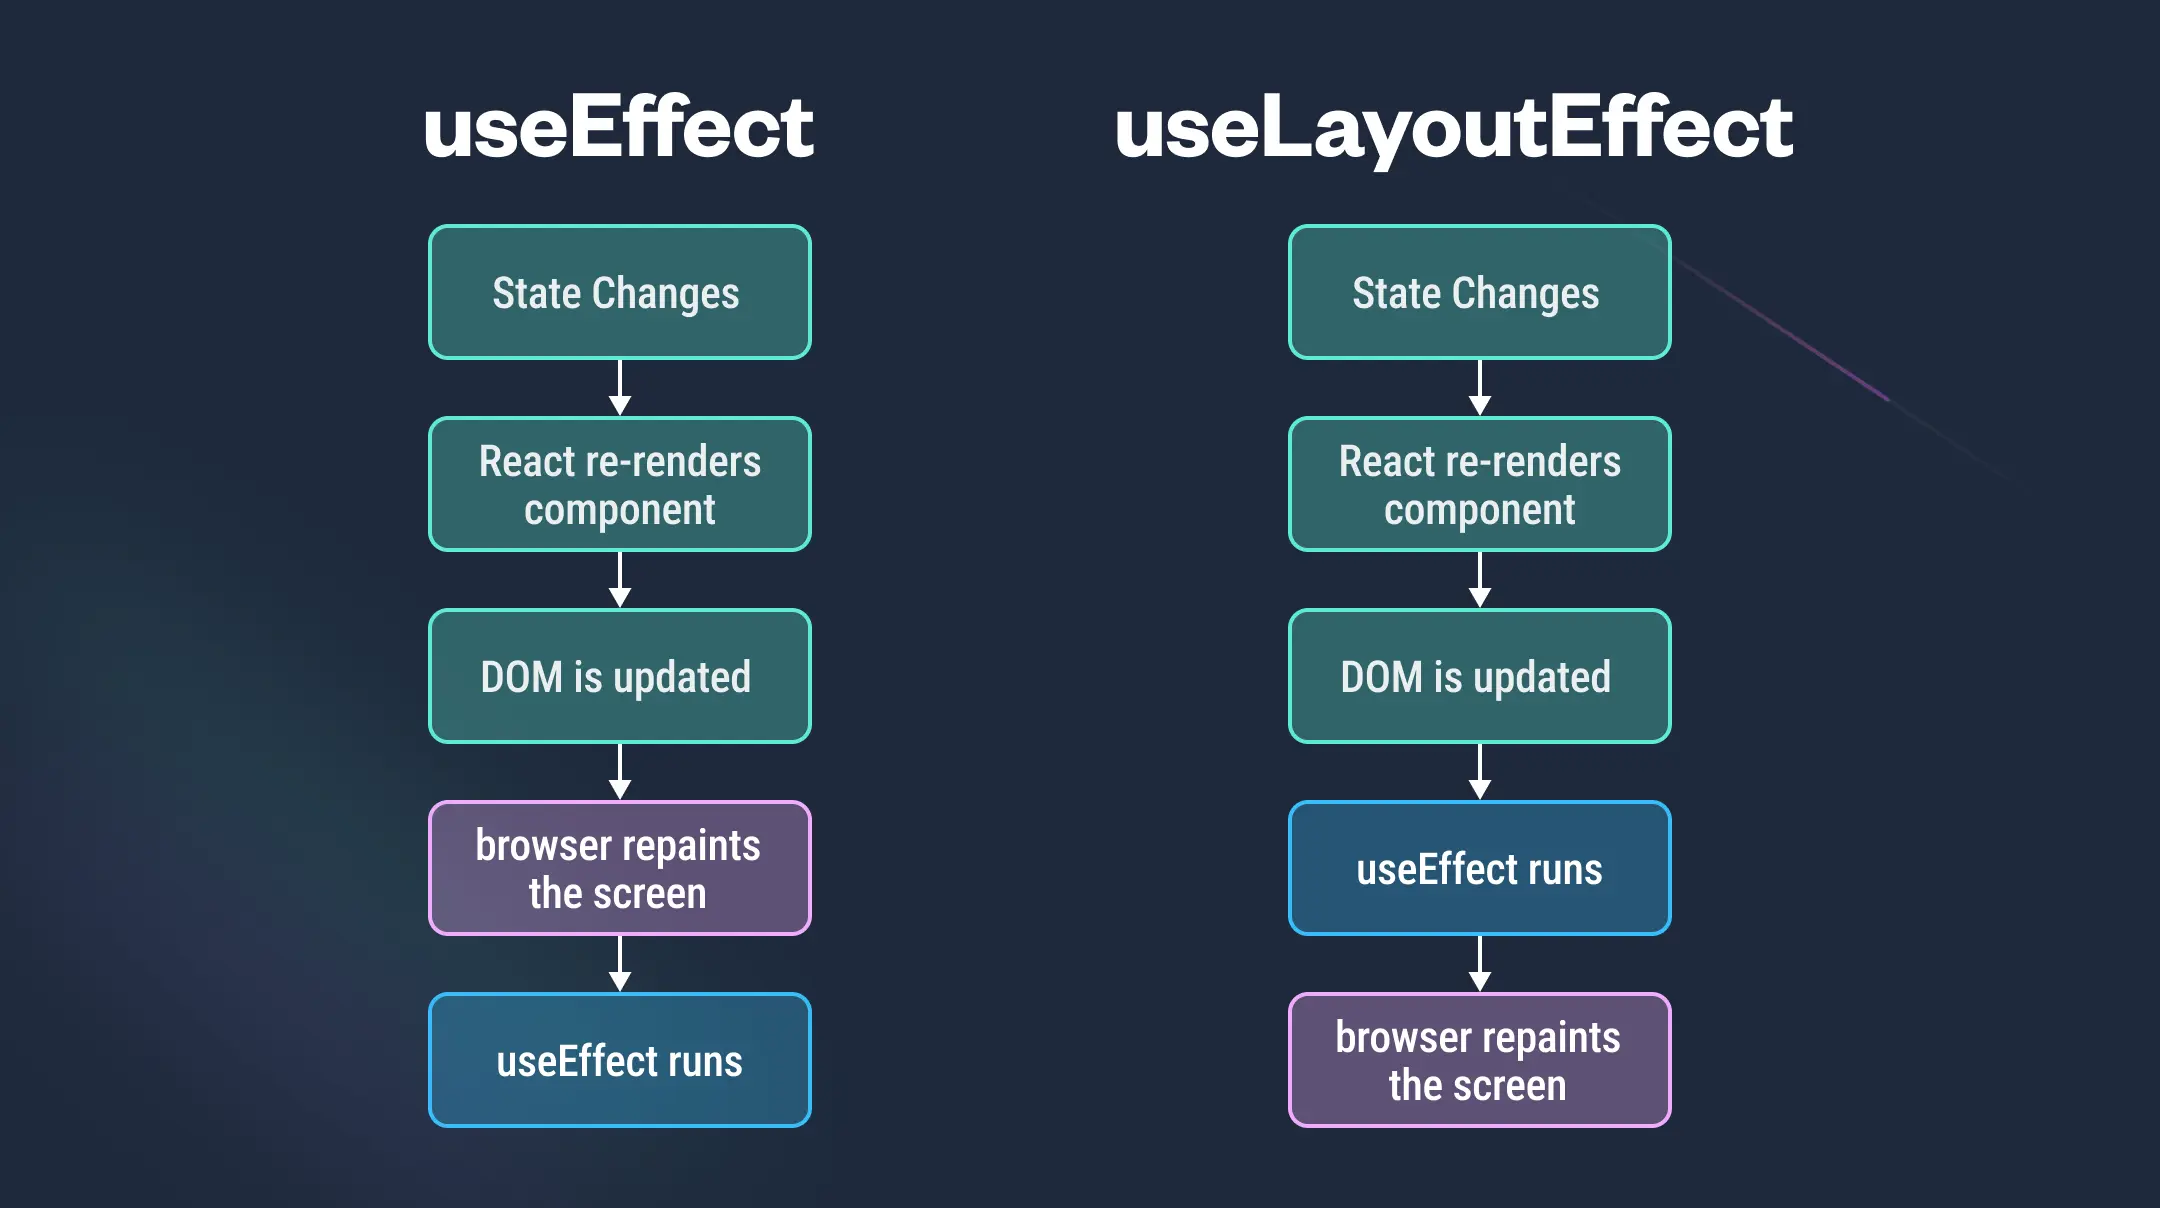 infographic explaining difference between useEffect and useLayout effect